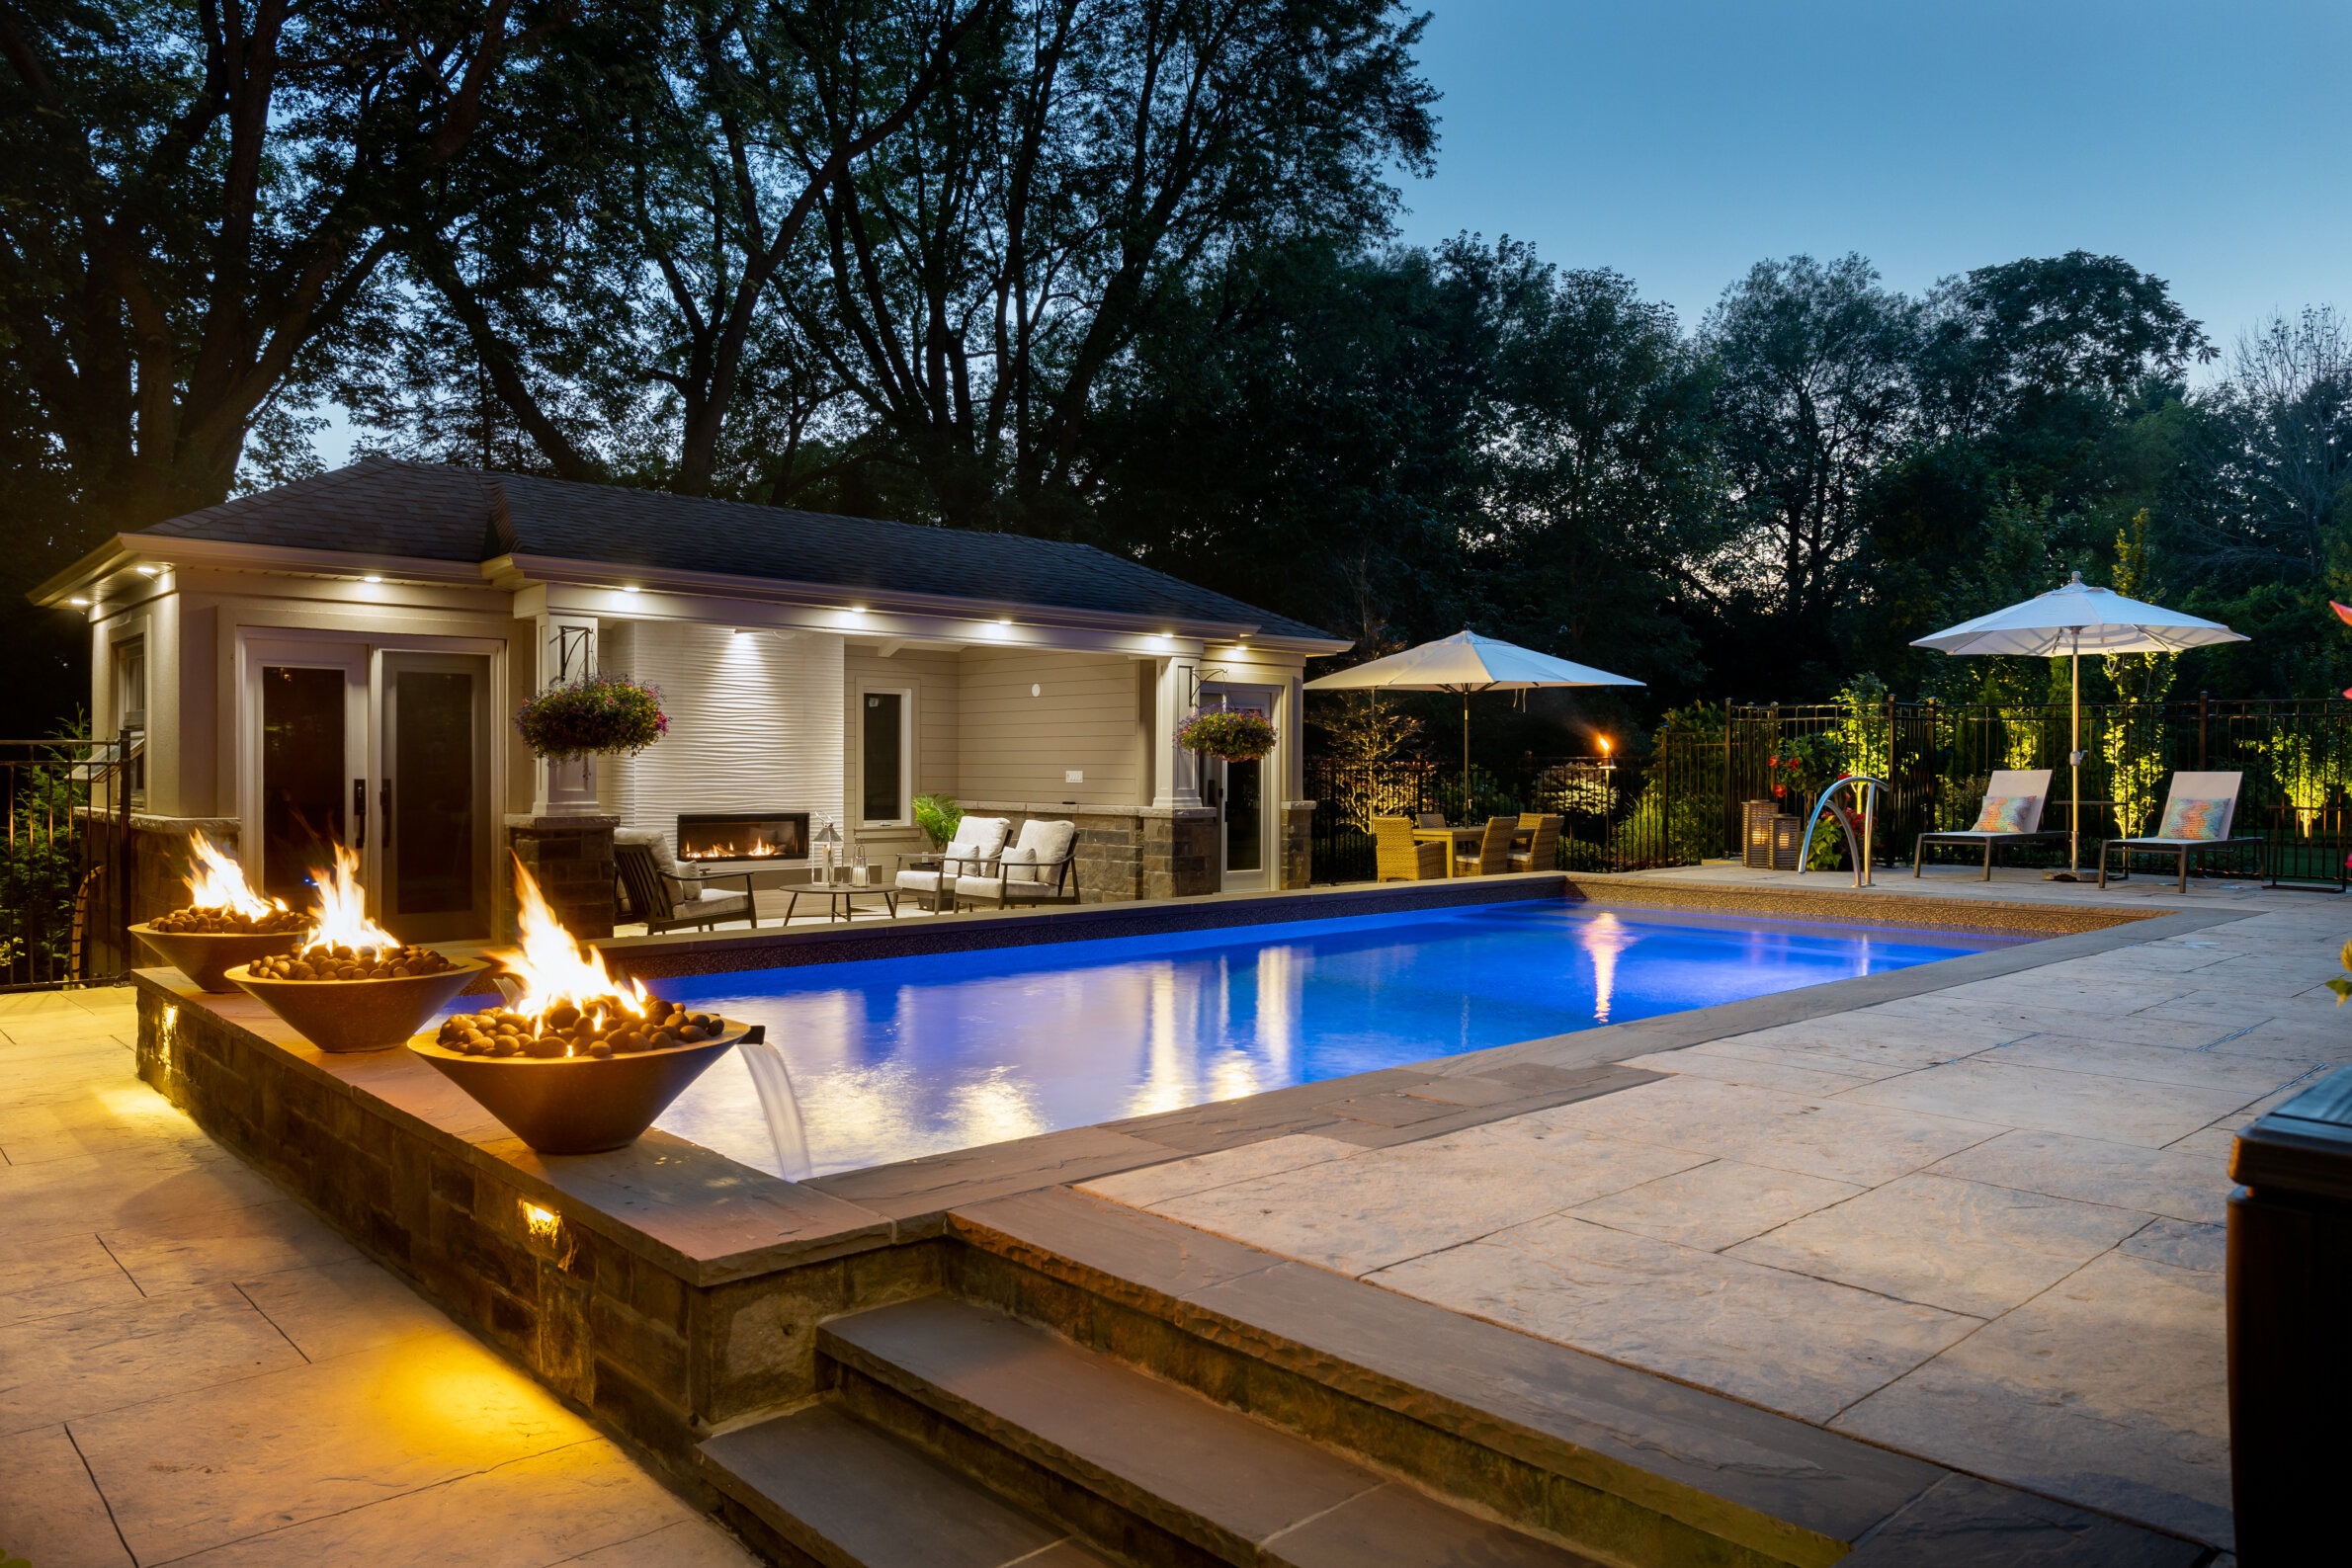 Luxurious backyard at dusk, featuring a lit swimming pool, fire bowls, patio furniture, and ambient lighting, with no people visible.